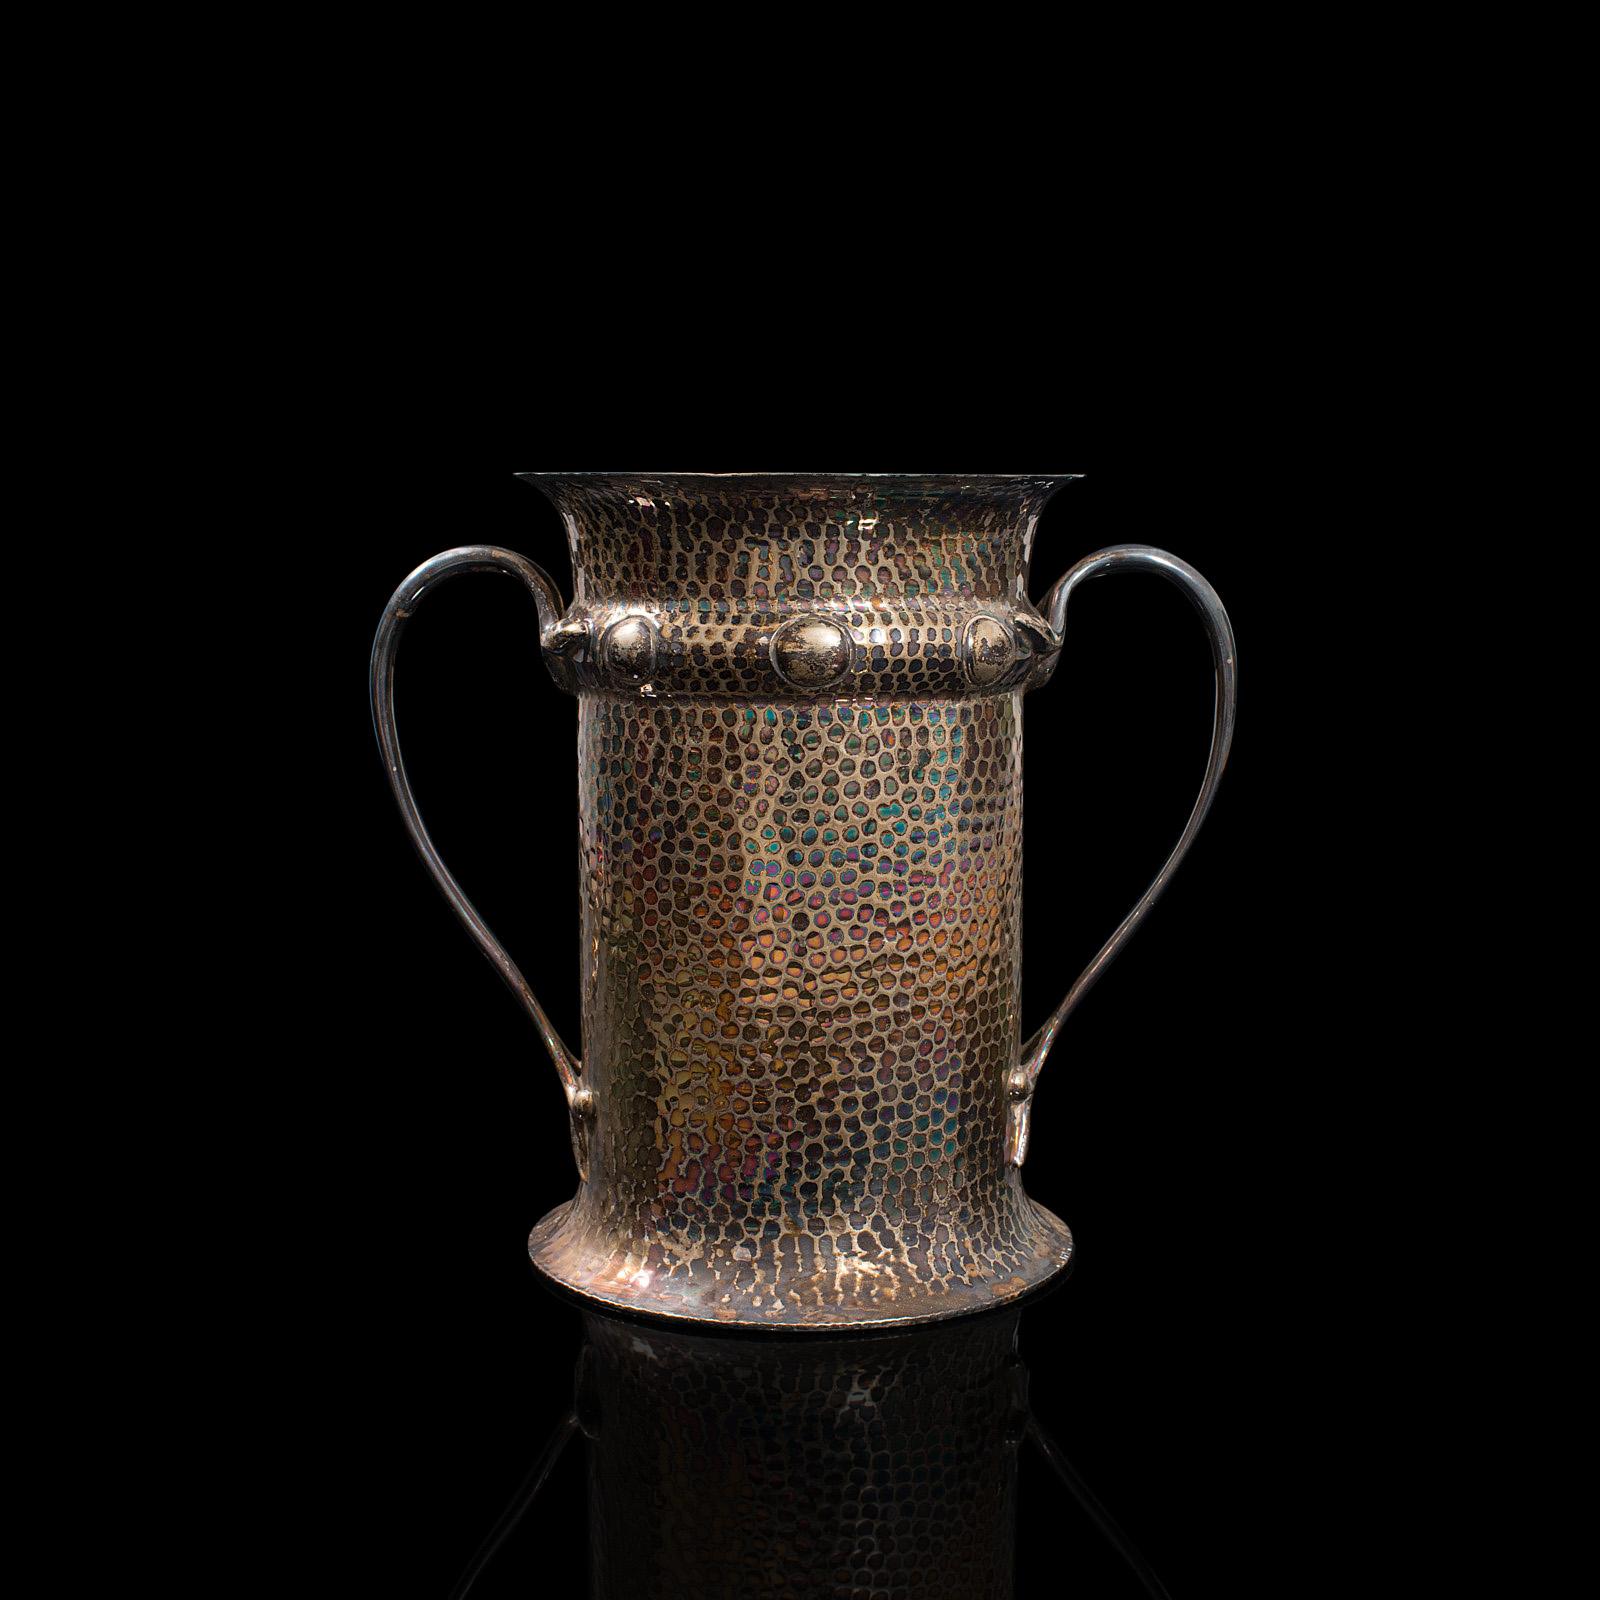 This is an antique twin handled tankard. An English, silver plated jug or display vase with Art Nouveau taste, dating to the late Victorian period, circa 1900.

Ornate decoration presents a distinguished look
Displaying a desirable aged patina